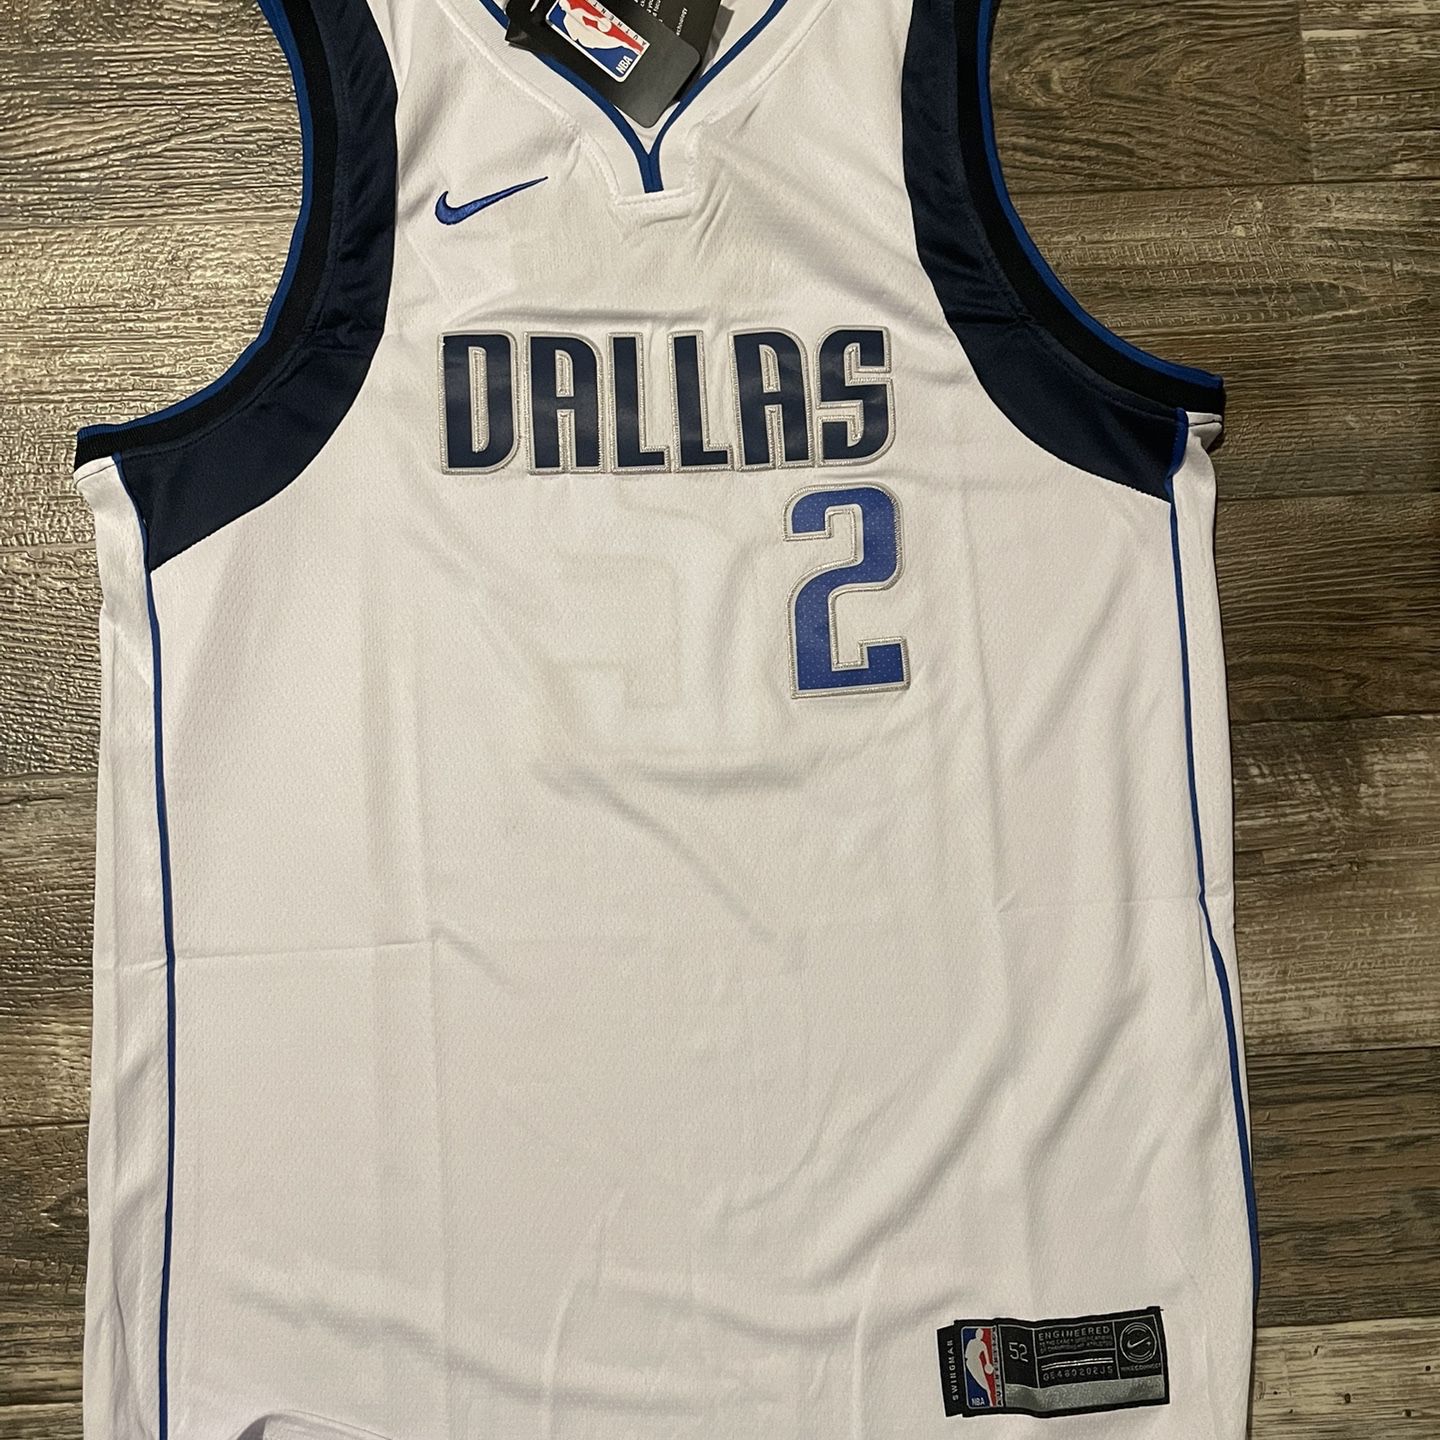 Kyrie Irving USA Olympic Jersey 2012 for Sale in Austin, TX - OfferUp